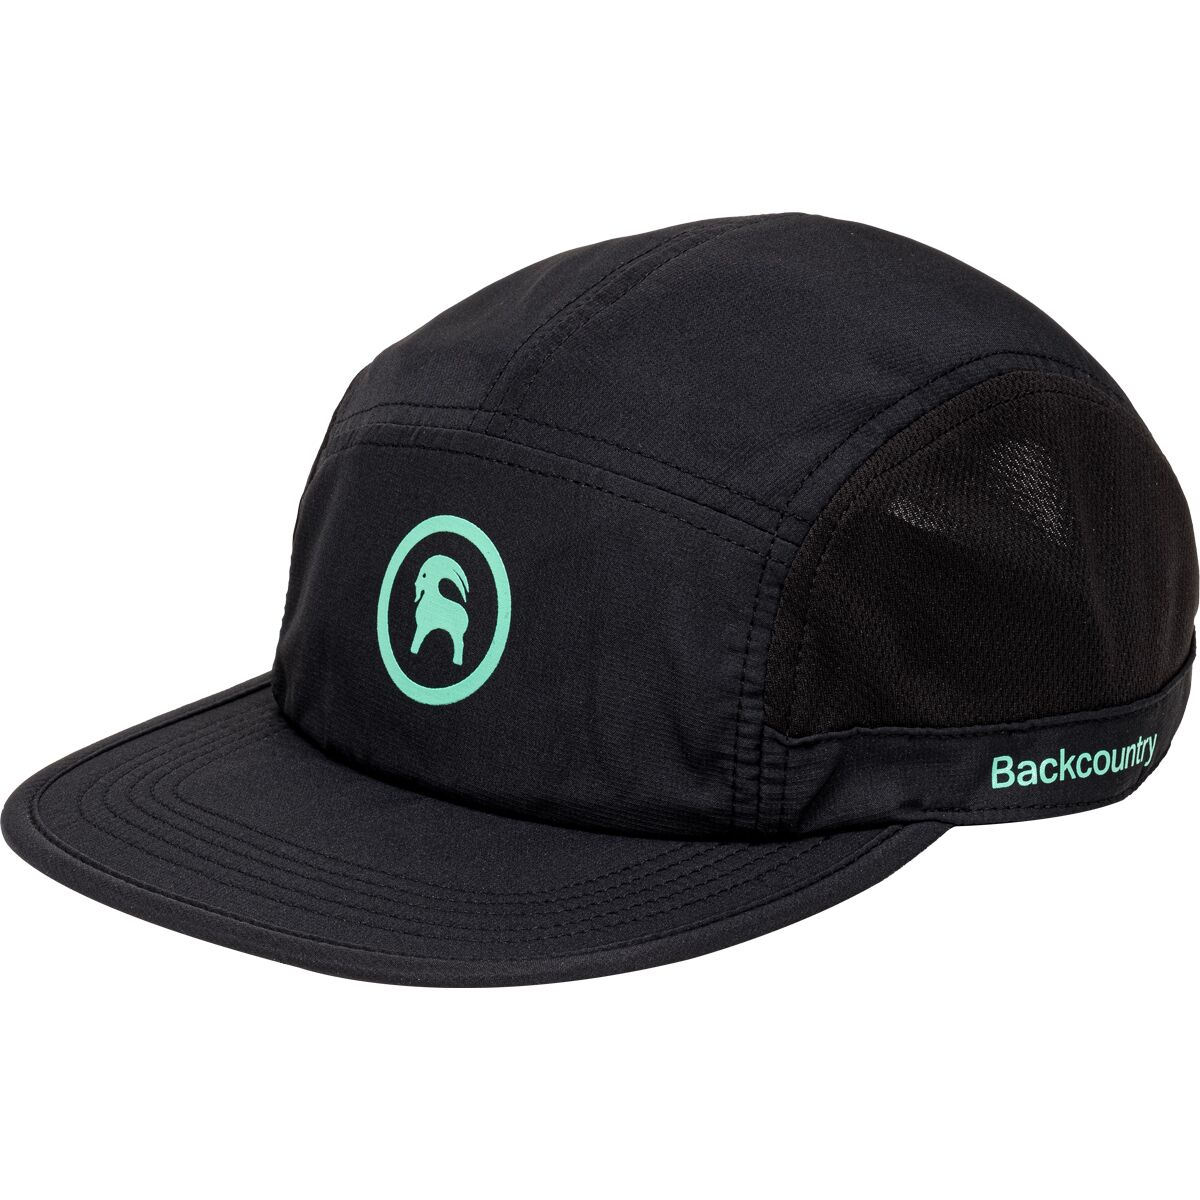 Backcountry Hybrid Runner's Hat - Accessories